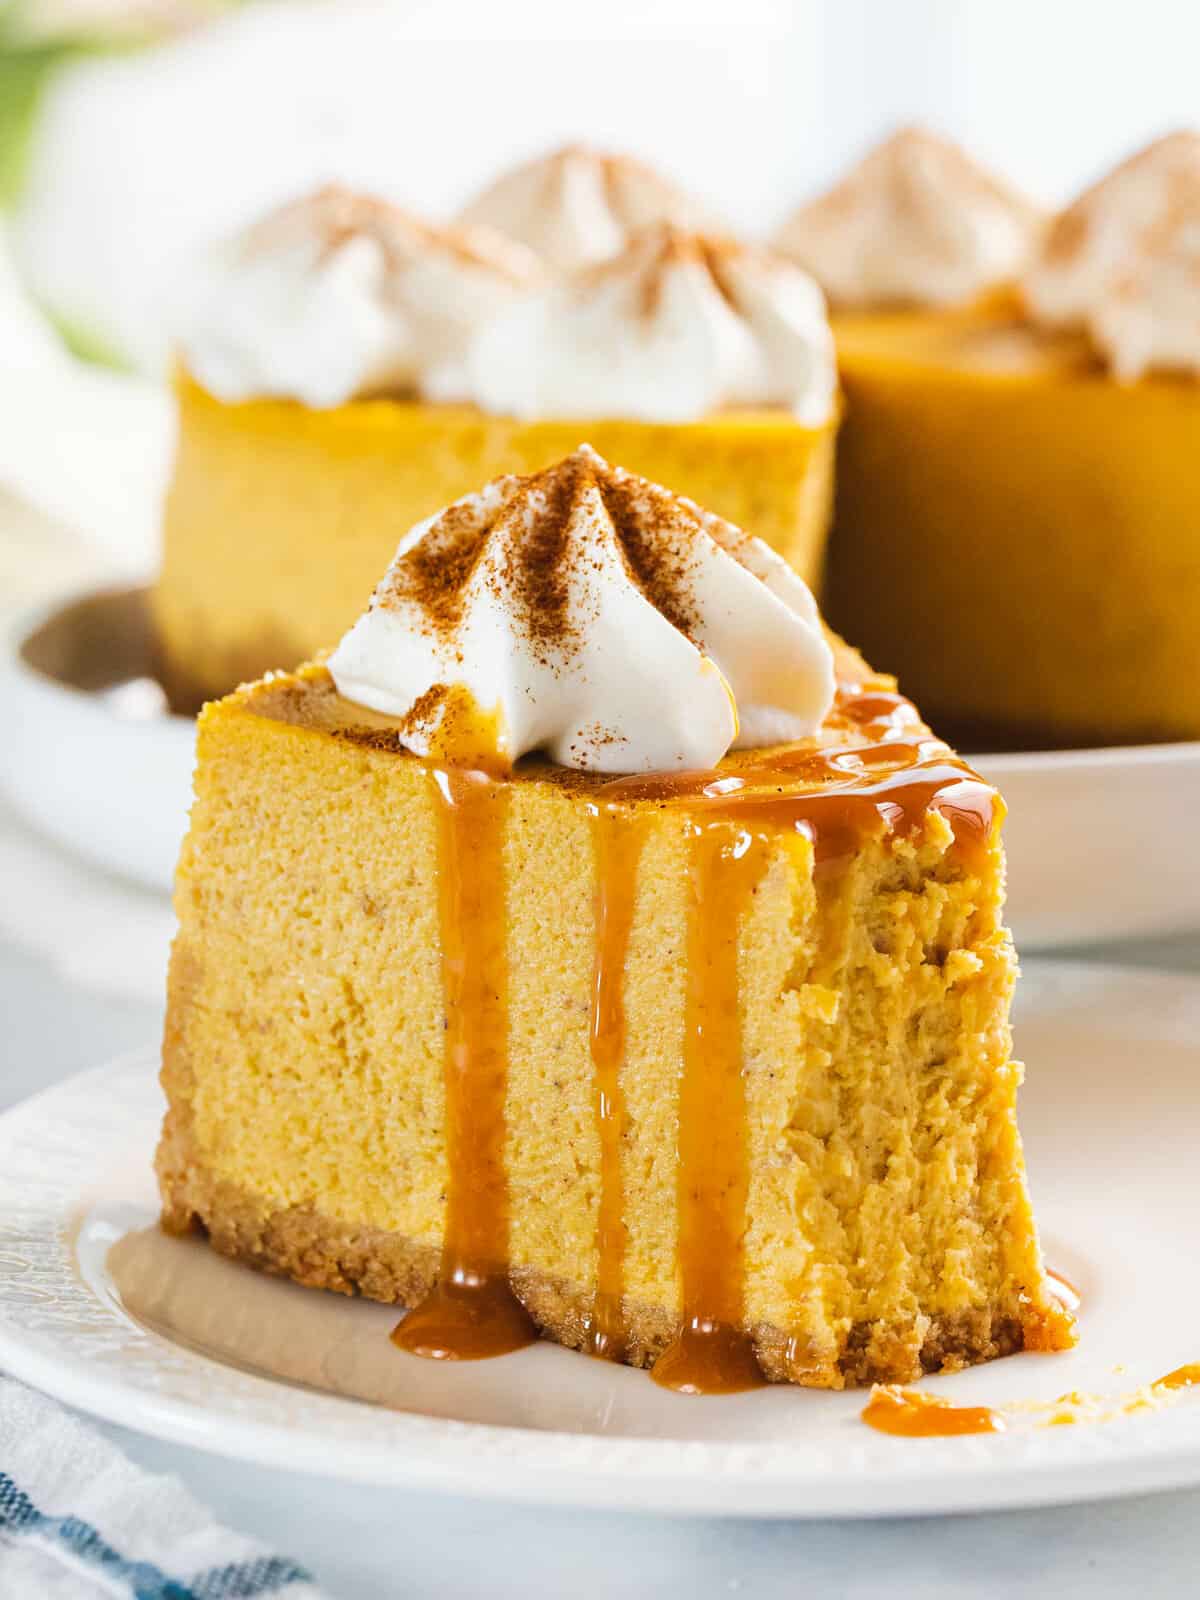 Pumpkin cheesecake with caramel sauce and whipped cream.